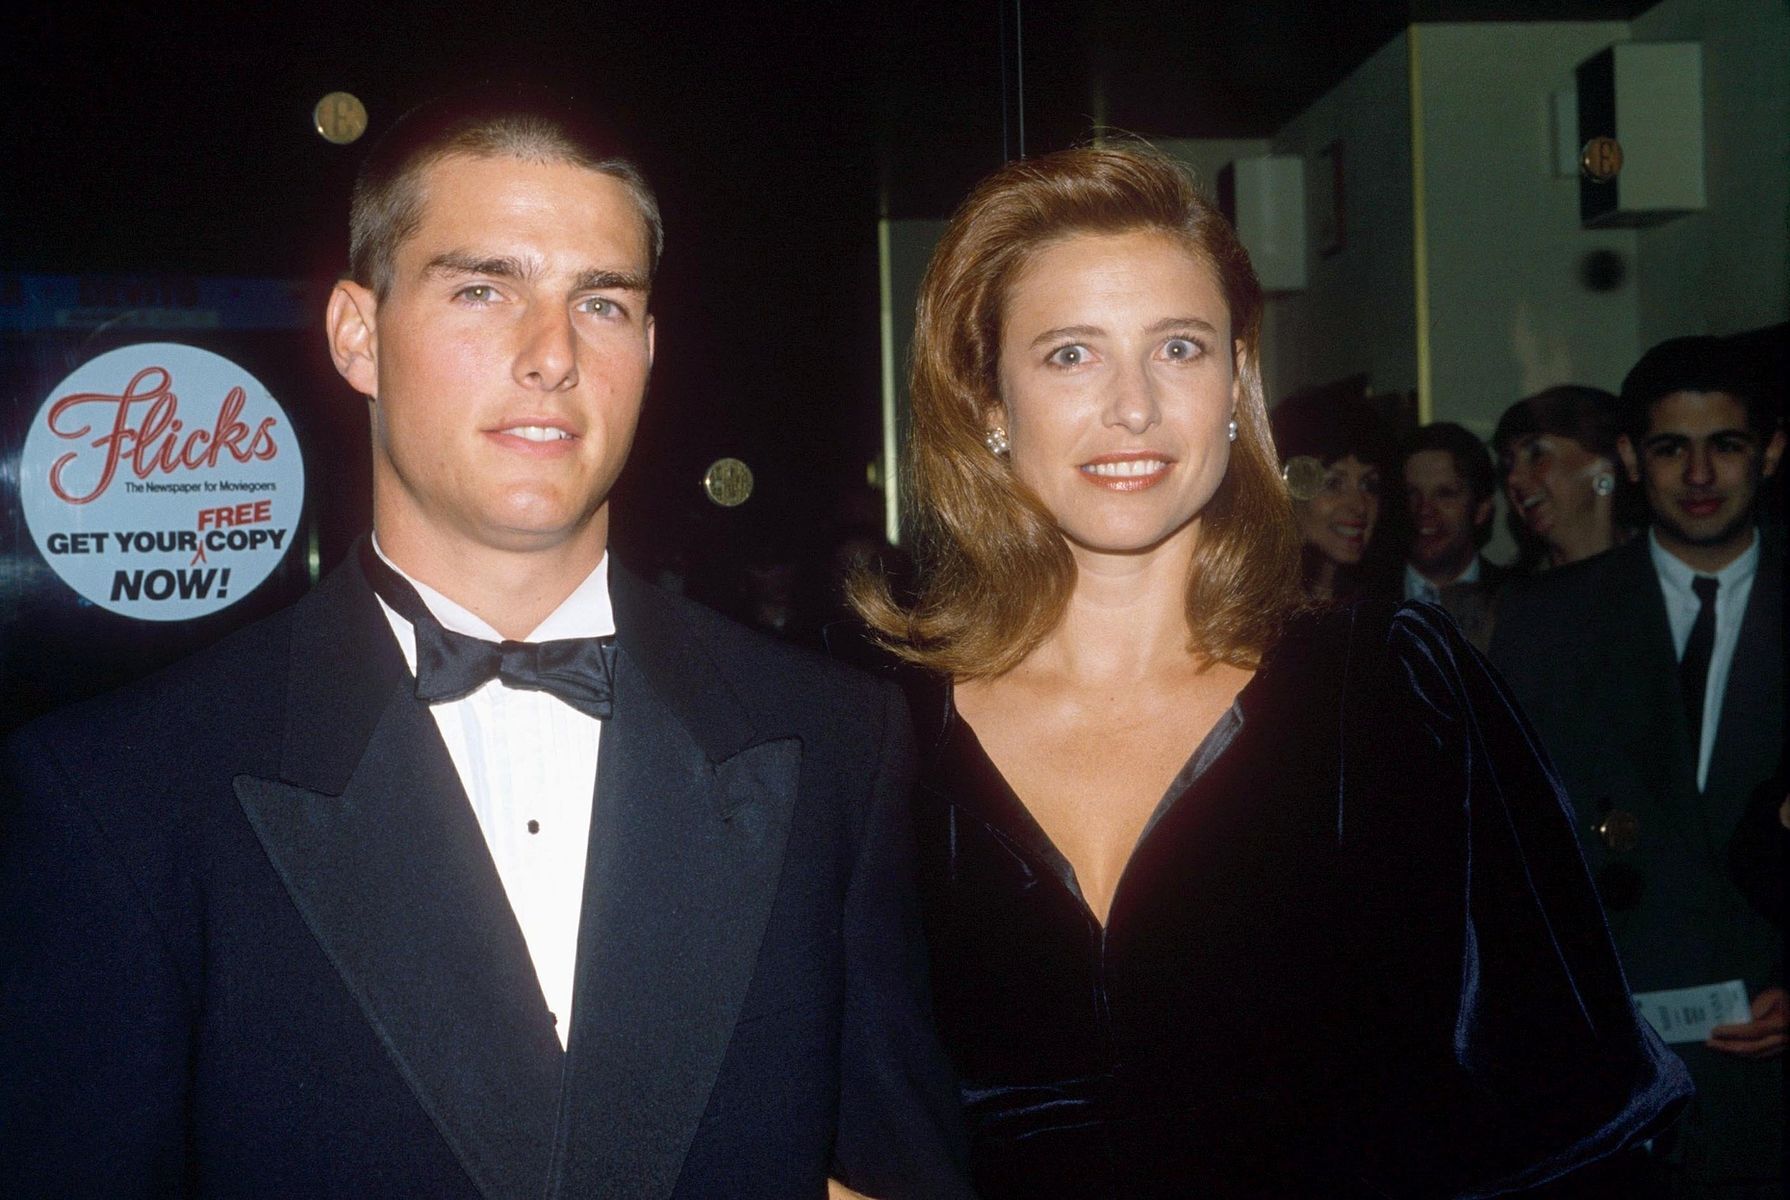 <p>In 1986, Cruise told <a href="https://www.rollingstone.com/movies/movie-news/tom-cruise-winging-it-2-190433/" class="atom_link atom_valid"><em>Rolling Stone</em></a> he’d met Mimi Rogers at a dinner party while filming <em>Top Gun, </em>adding she was “extremely bright.” <a href="https://www.sun-sentinel.com/news/fl-xpm-1987-10-19-8703200687-story.html" class="atom_link atom_valid">Rogers went on to recall</a> how they were introduced by a mutual friend. The pair began dating, and within a year they were married. </p>